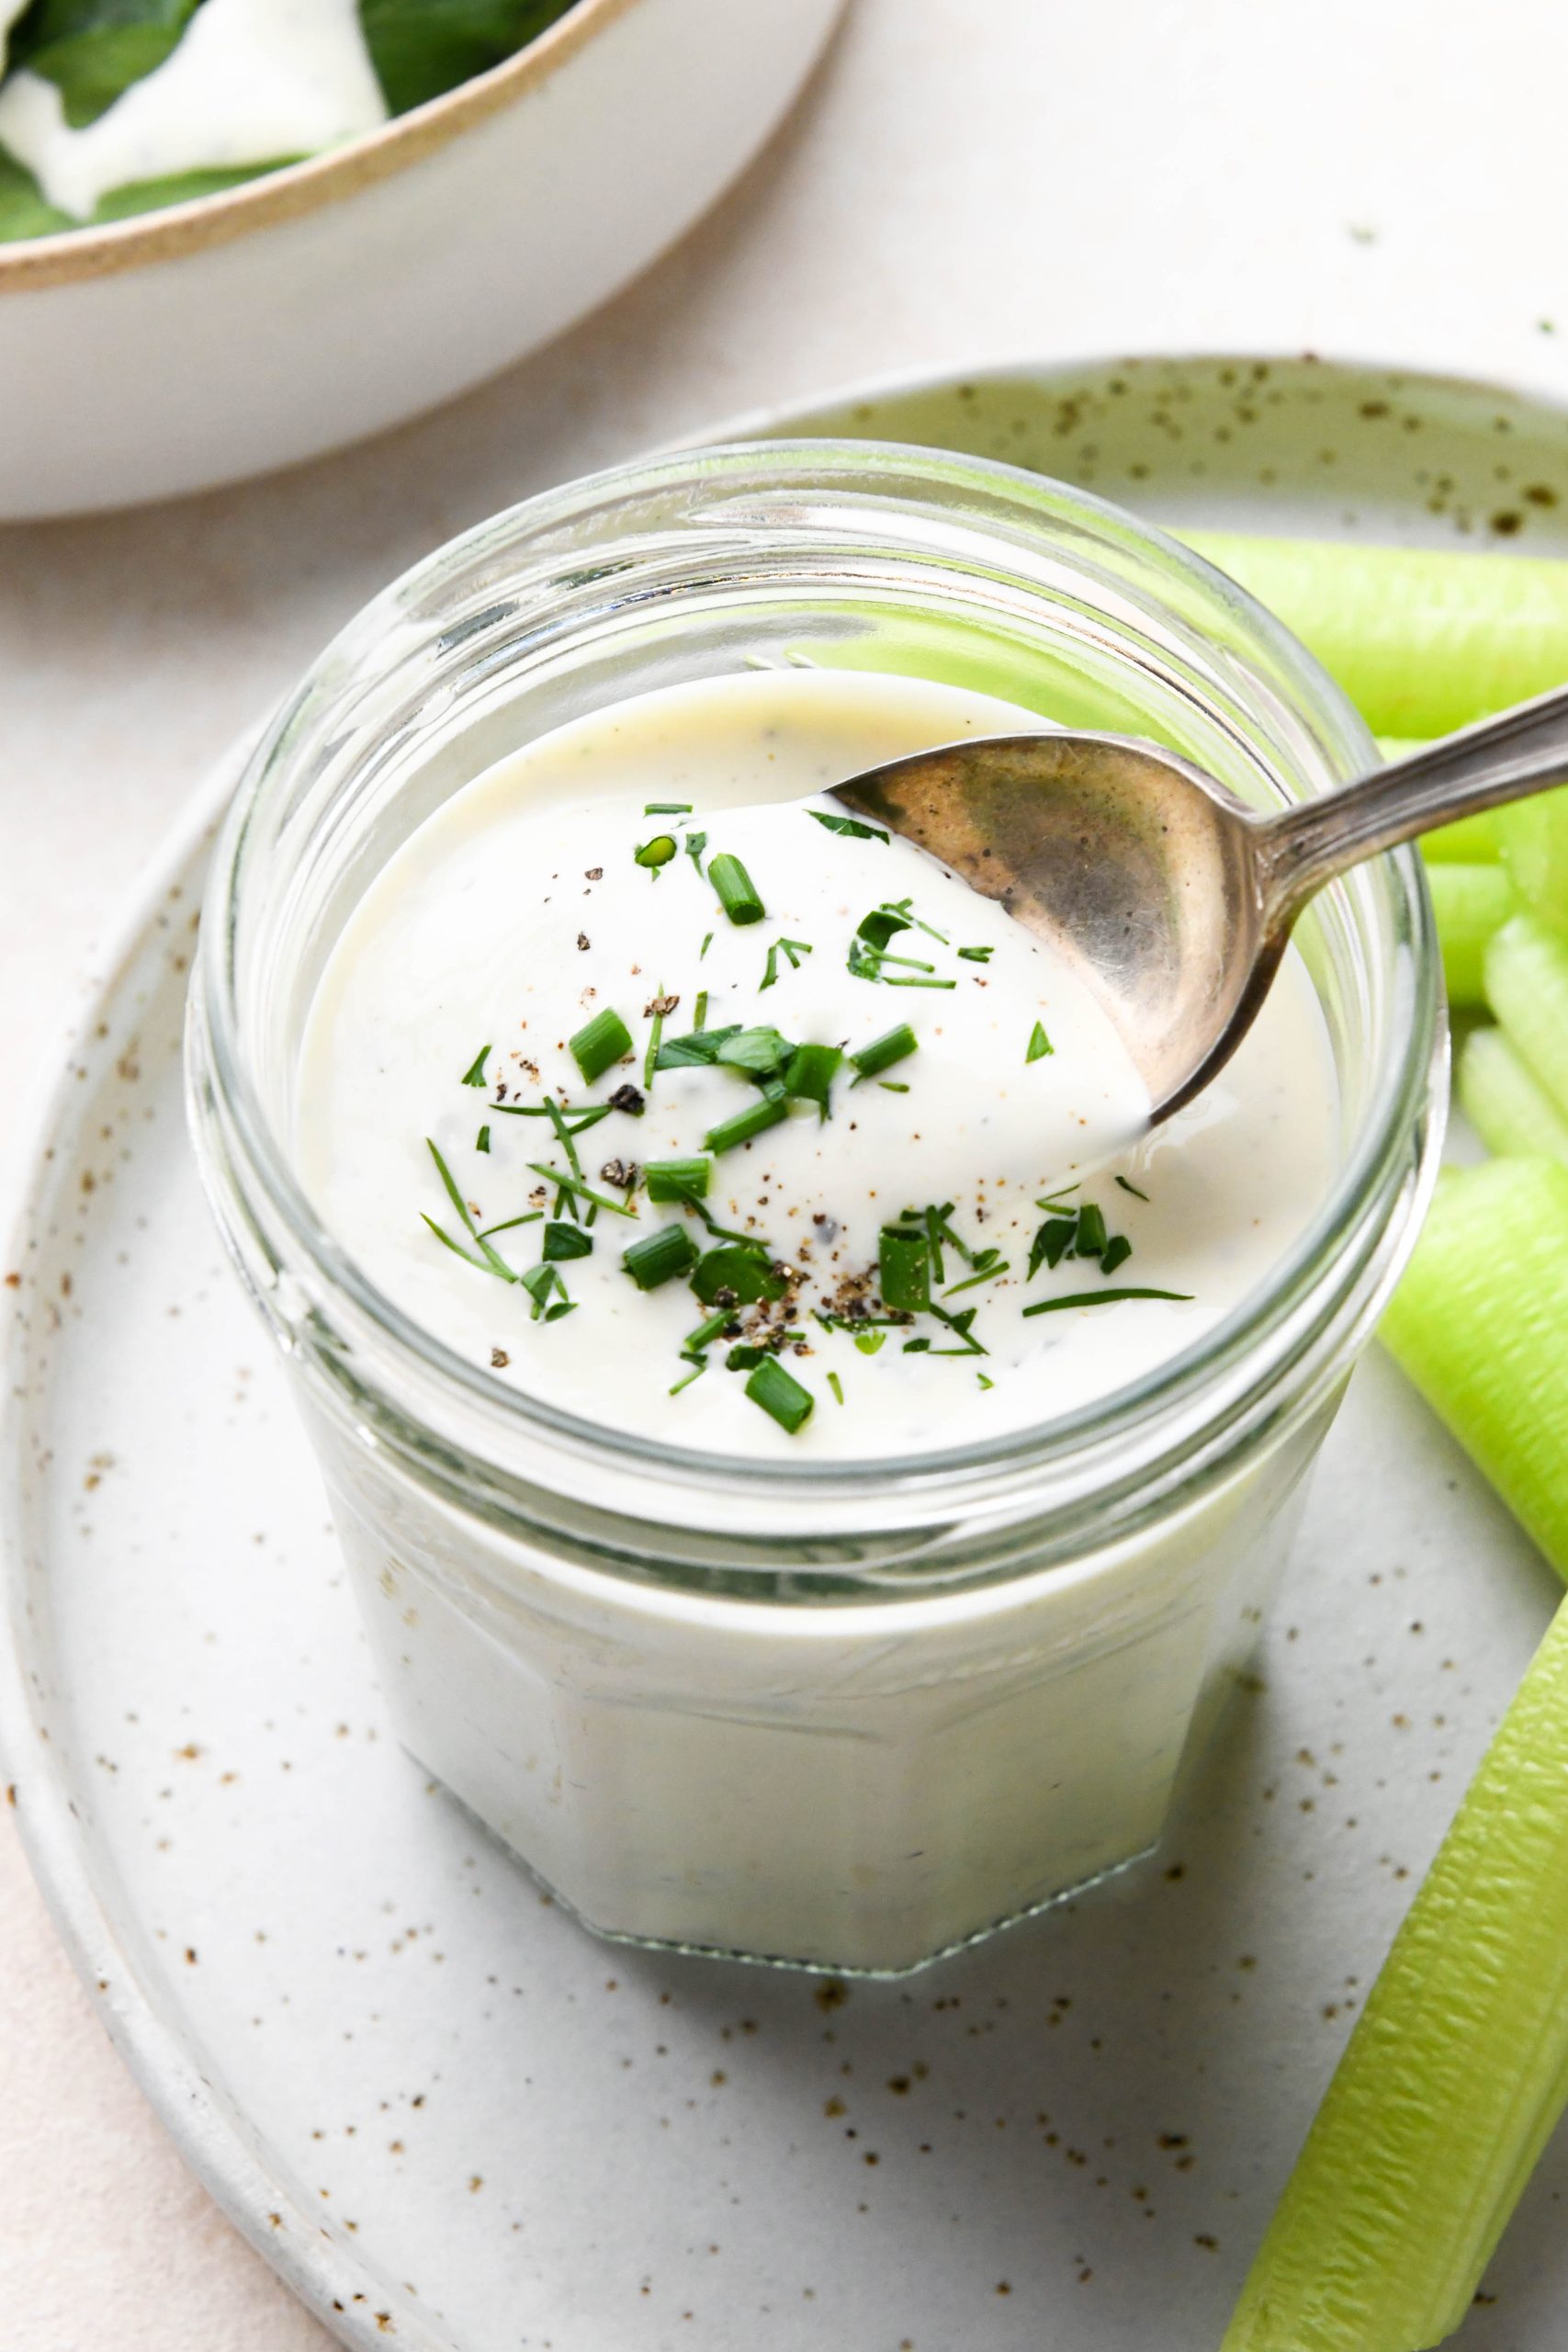 Dairy-Free Condiment Recipes (Spreads, Dips & Salad Dressings)